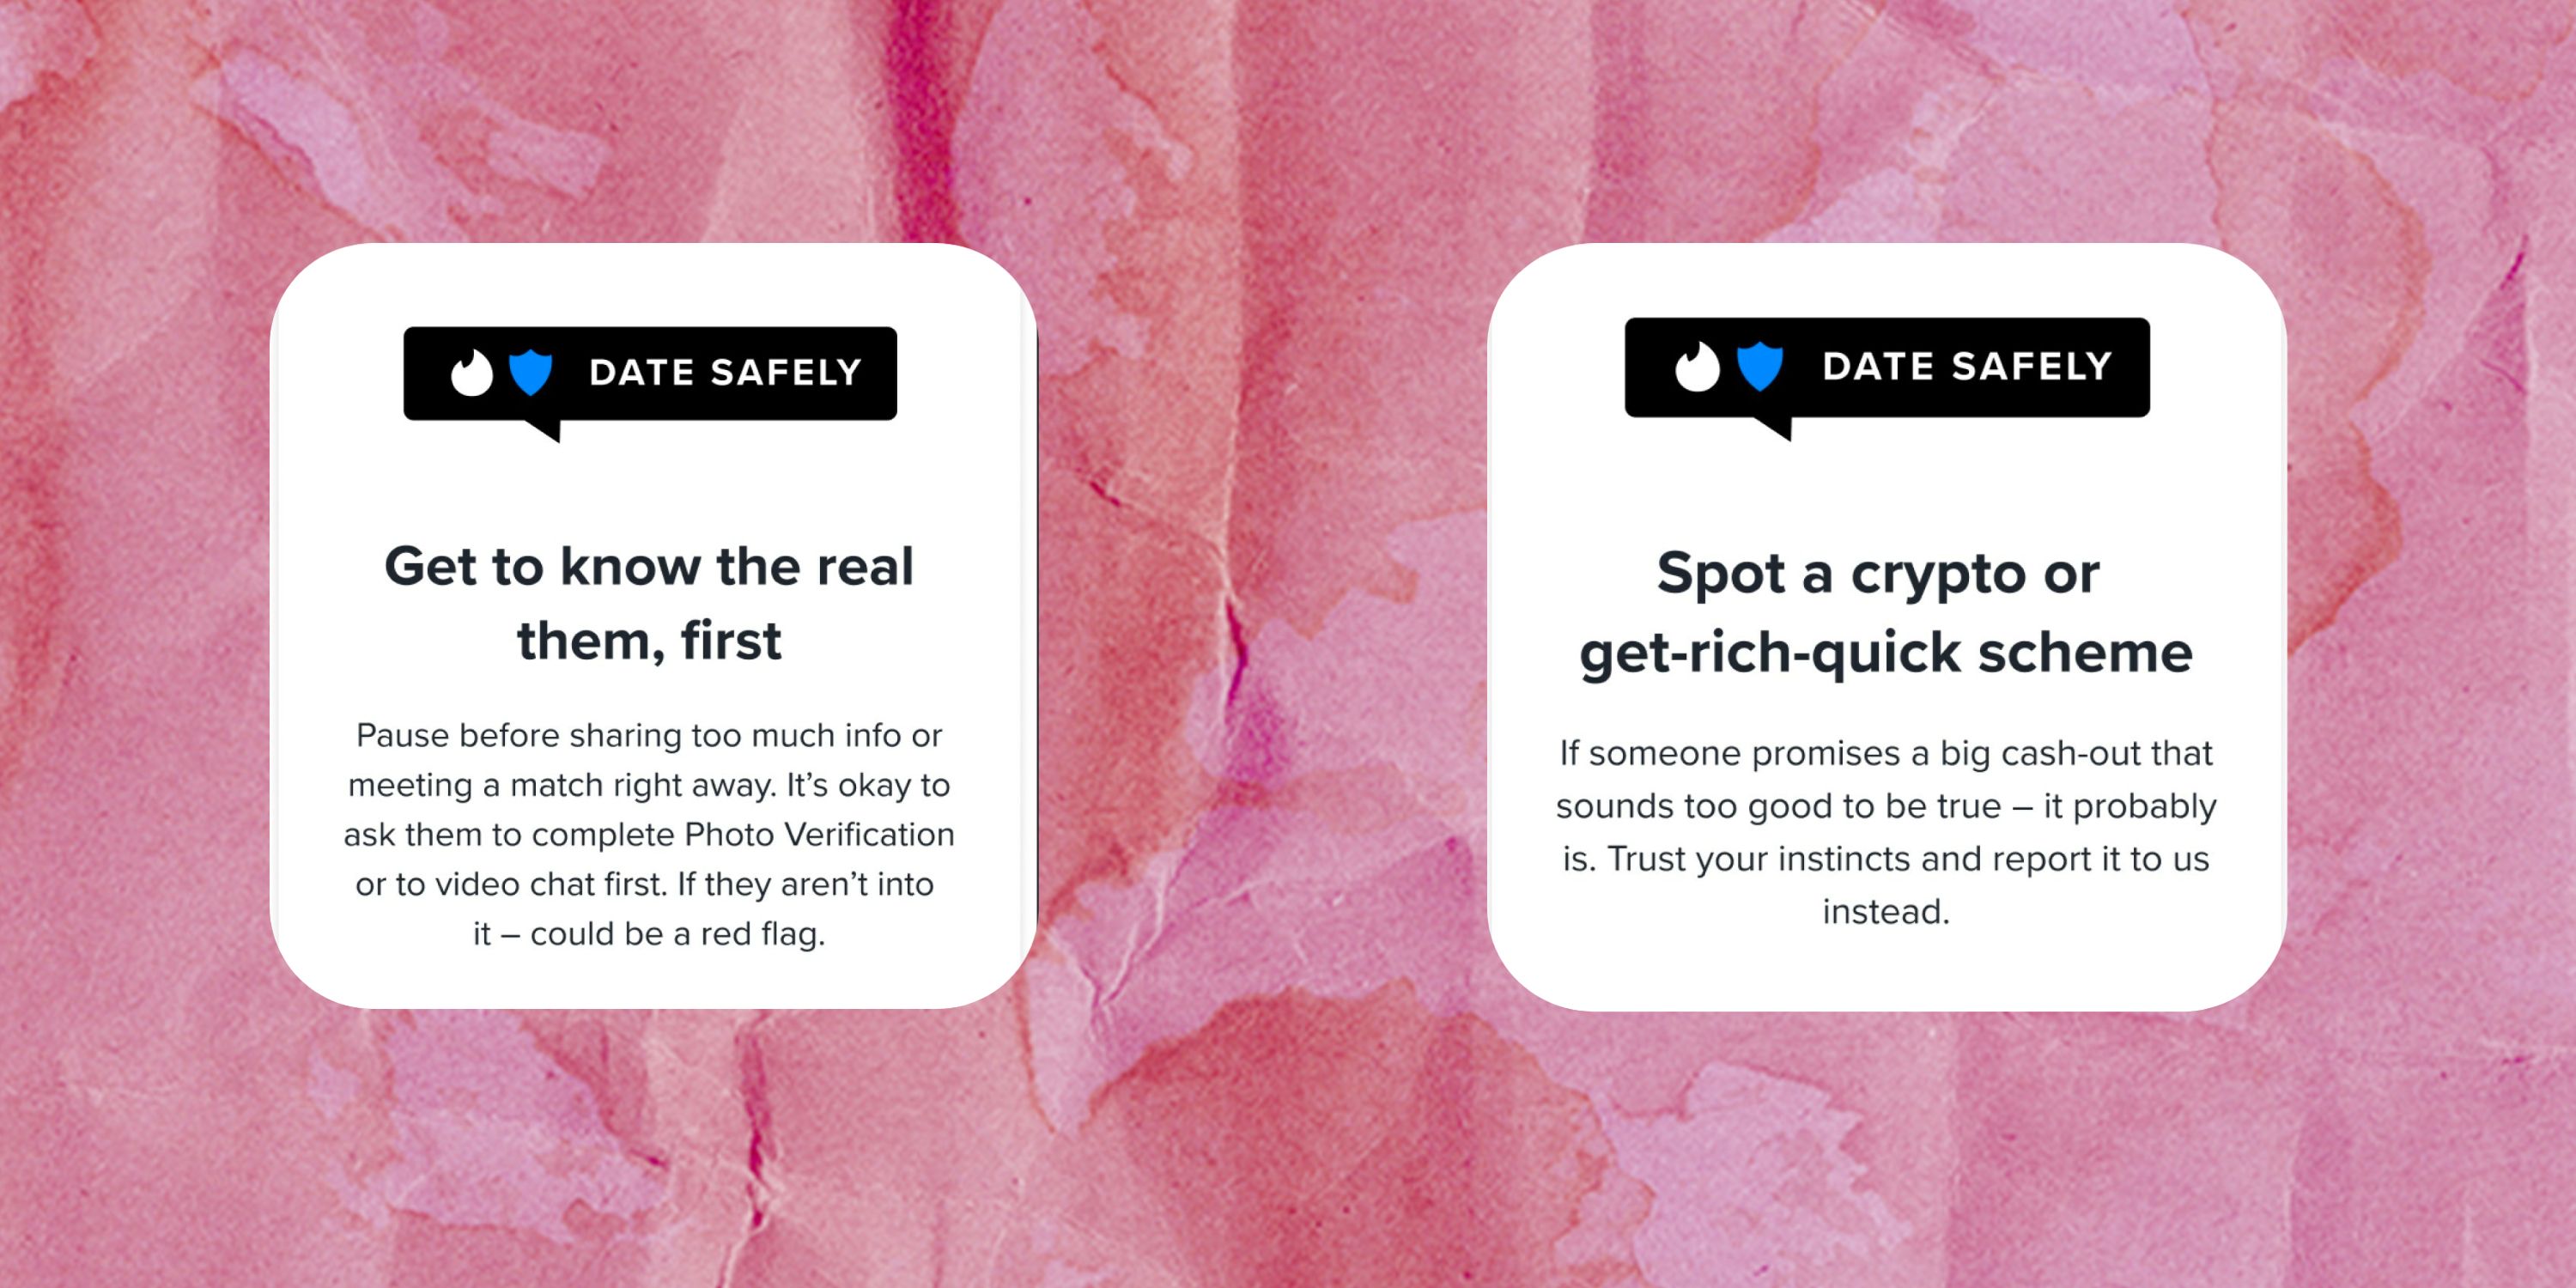 Two blurbs from Match Group's date safely tips on a pink backgroud